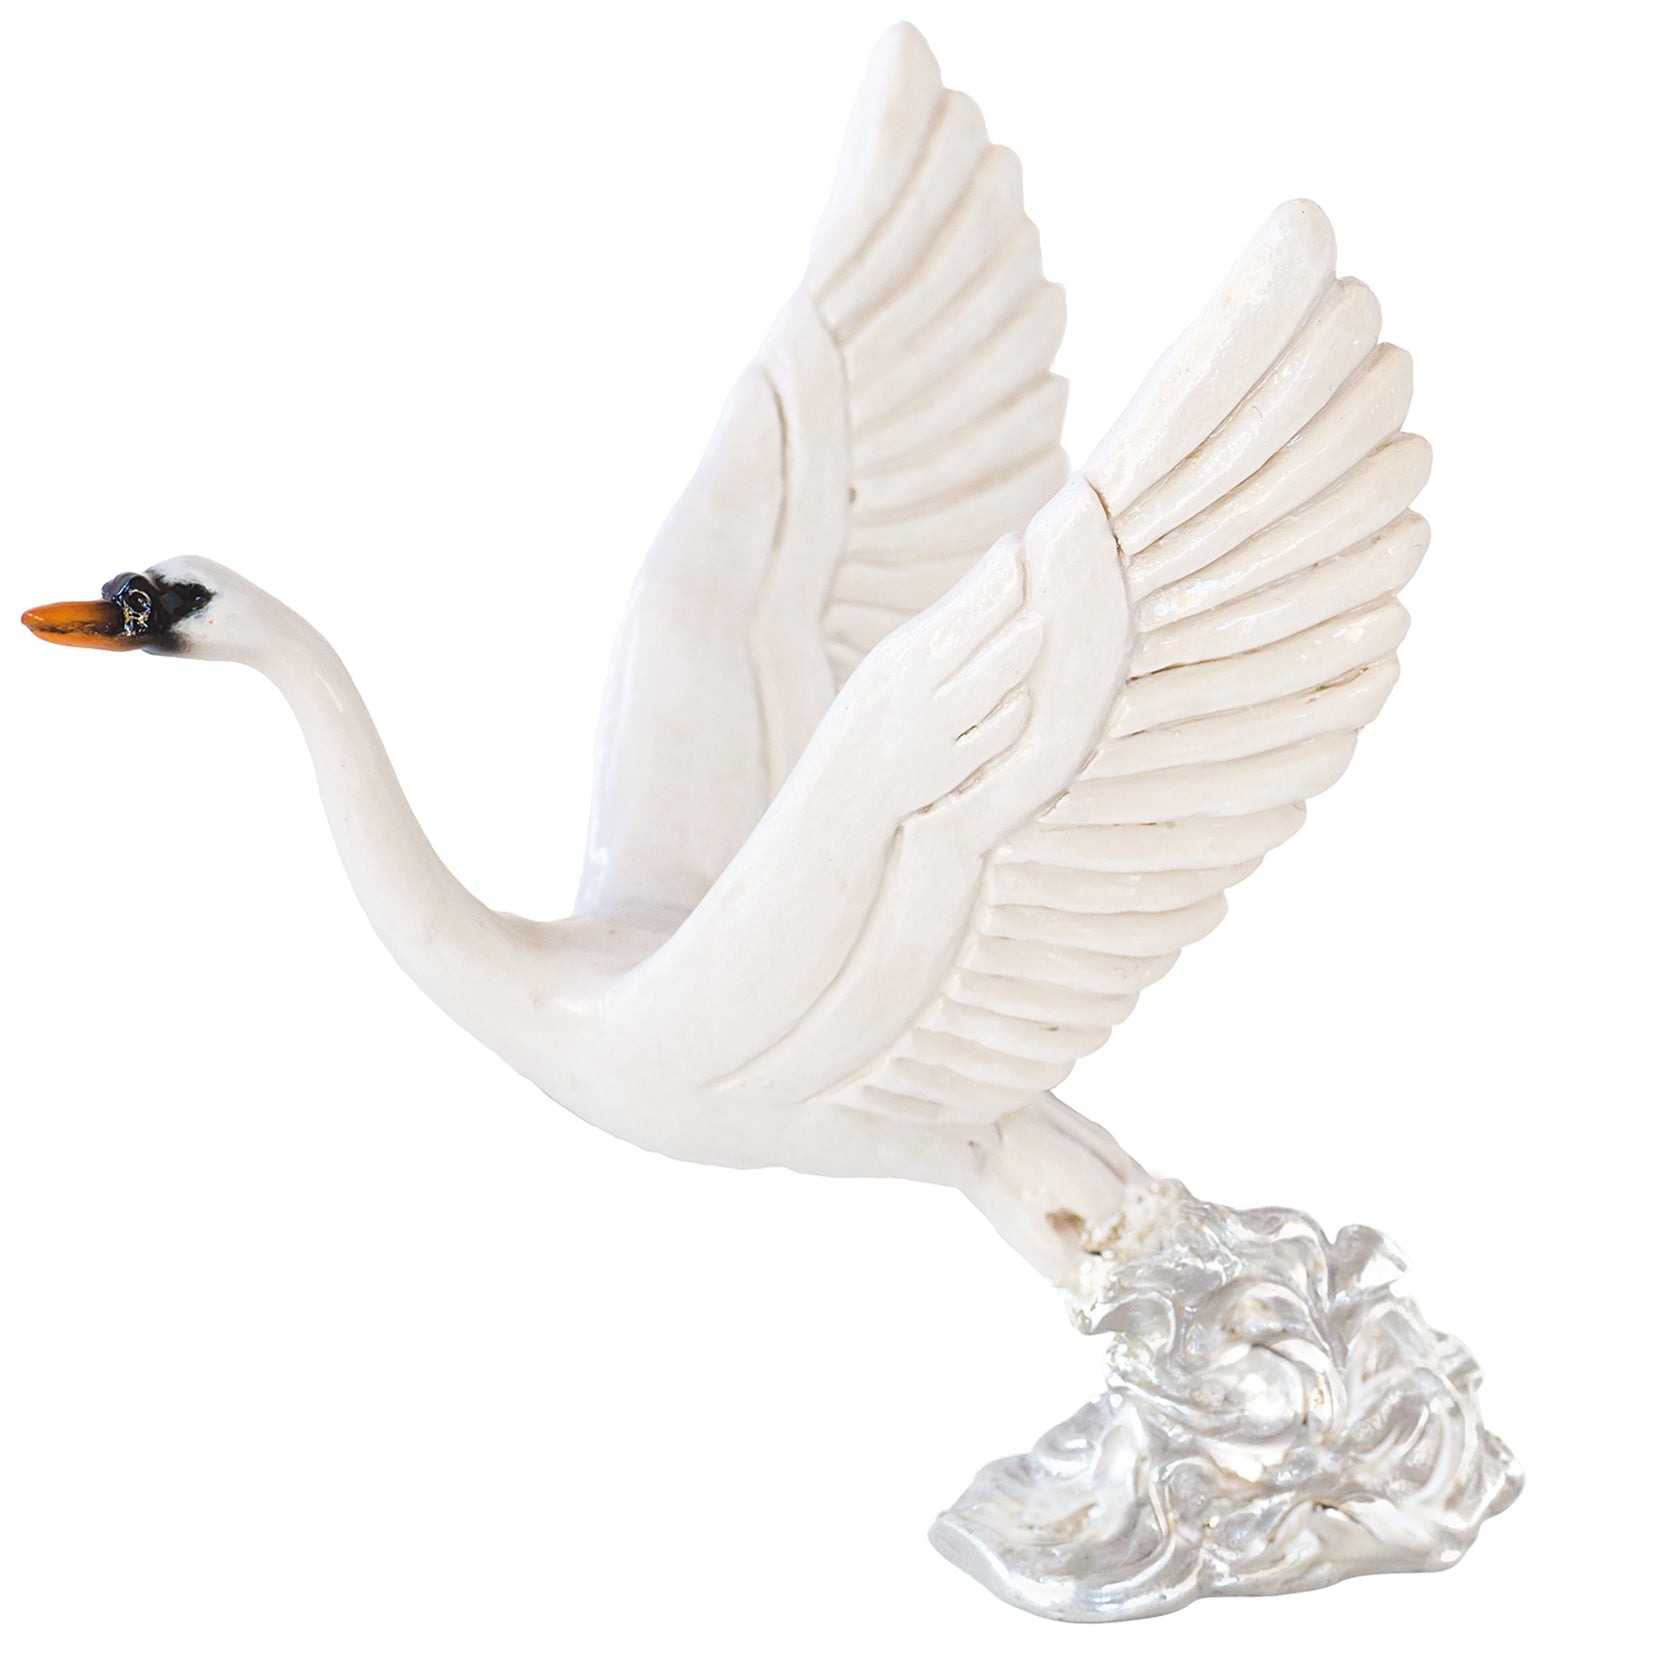 Swan - Nature's Realms from thetraditionalgiftshop.com